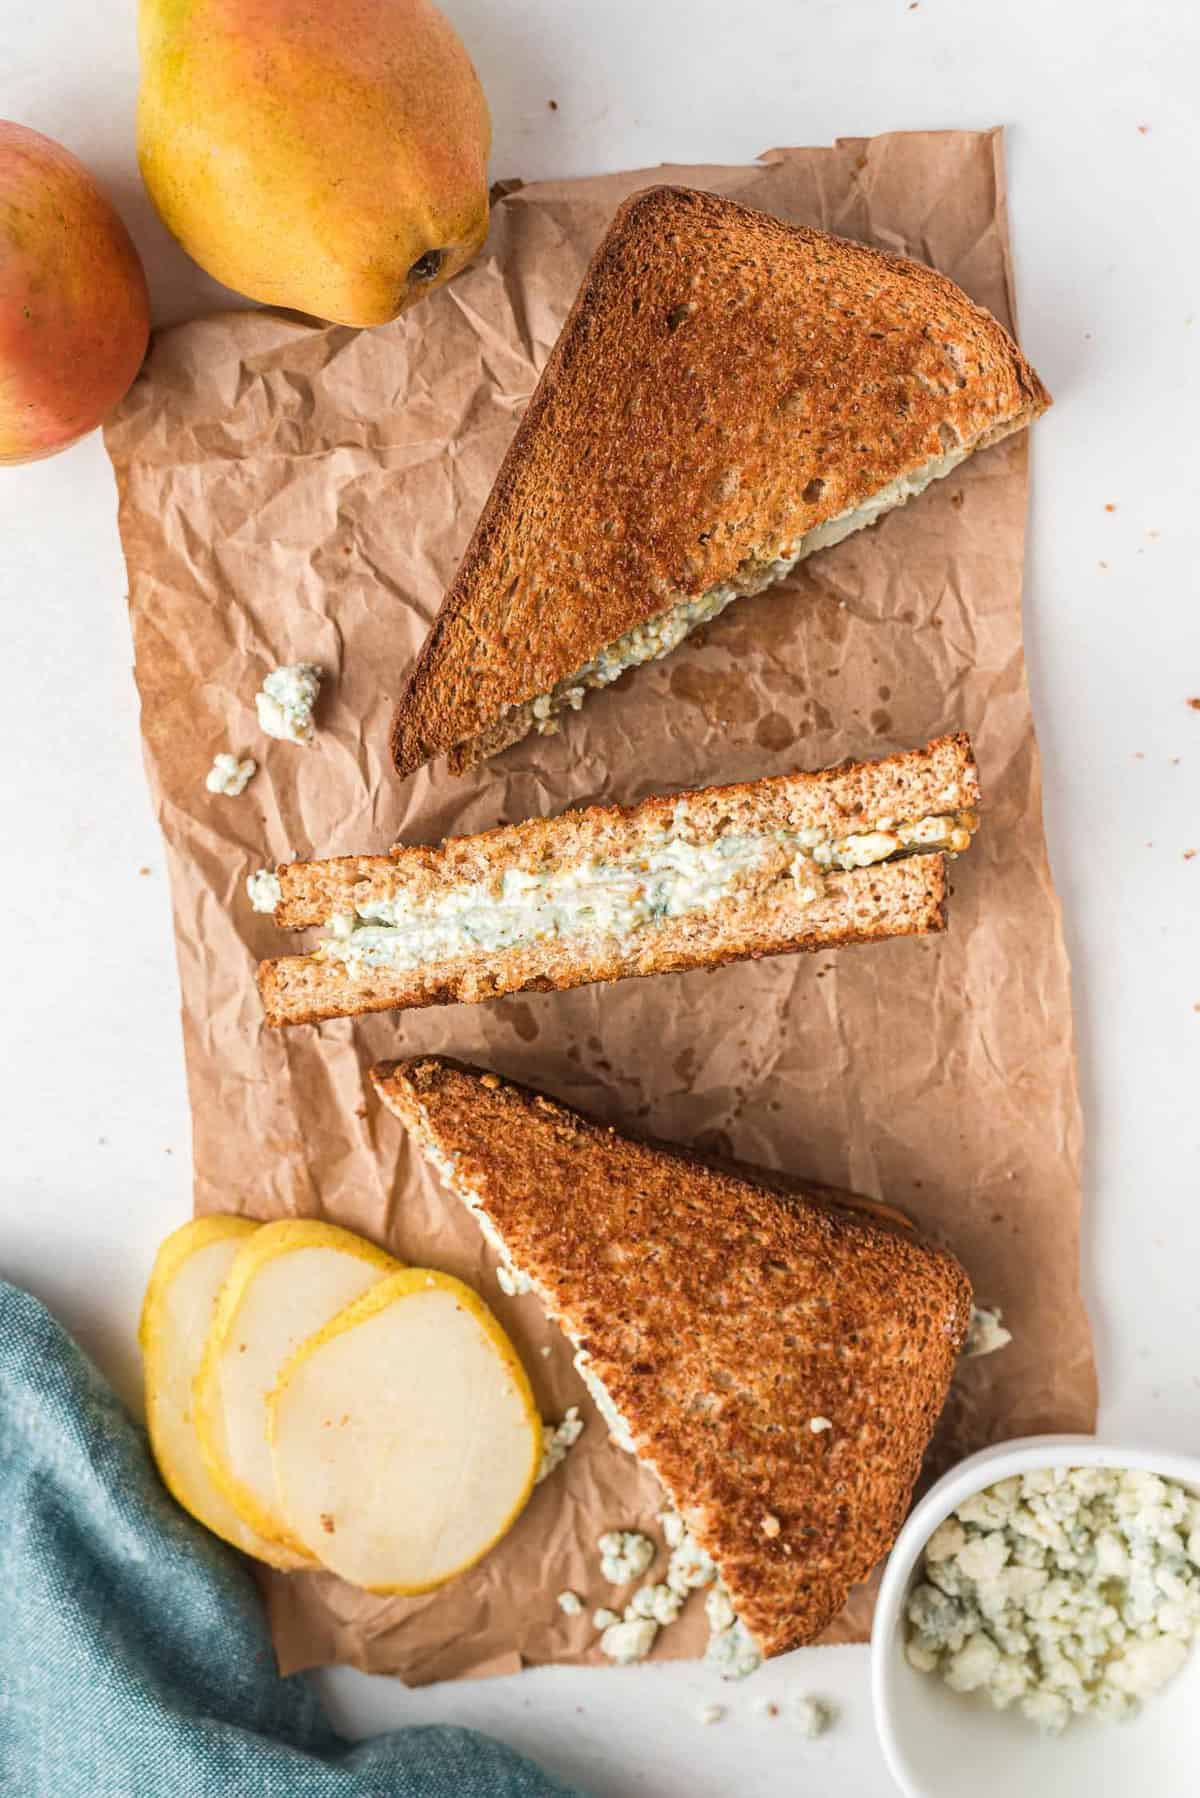 Grilled cheese made with blue cheese and pear slices.